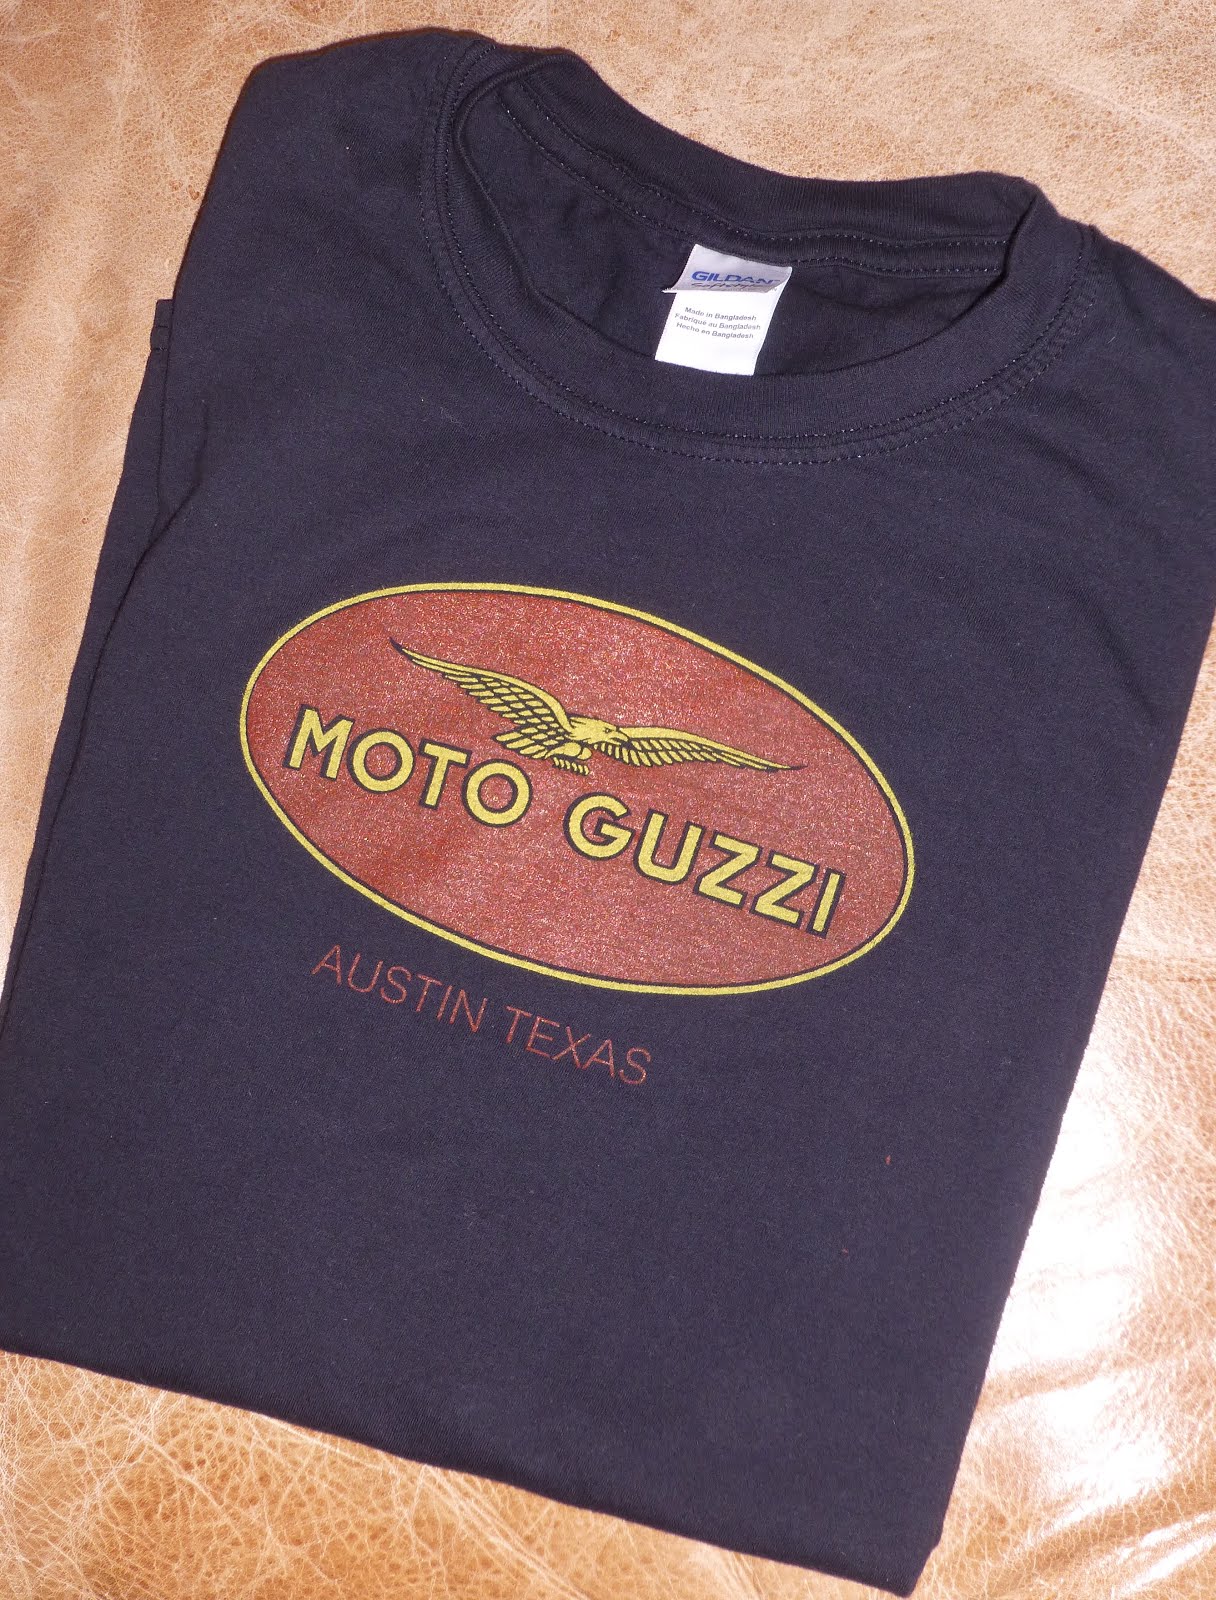 Shopping for a Guzzi in Central Texas